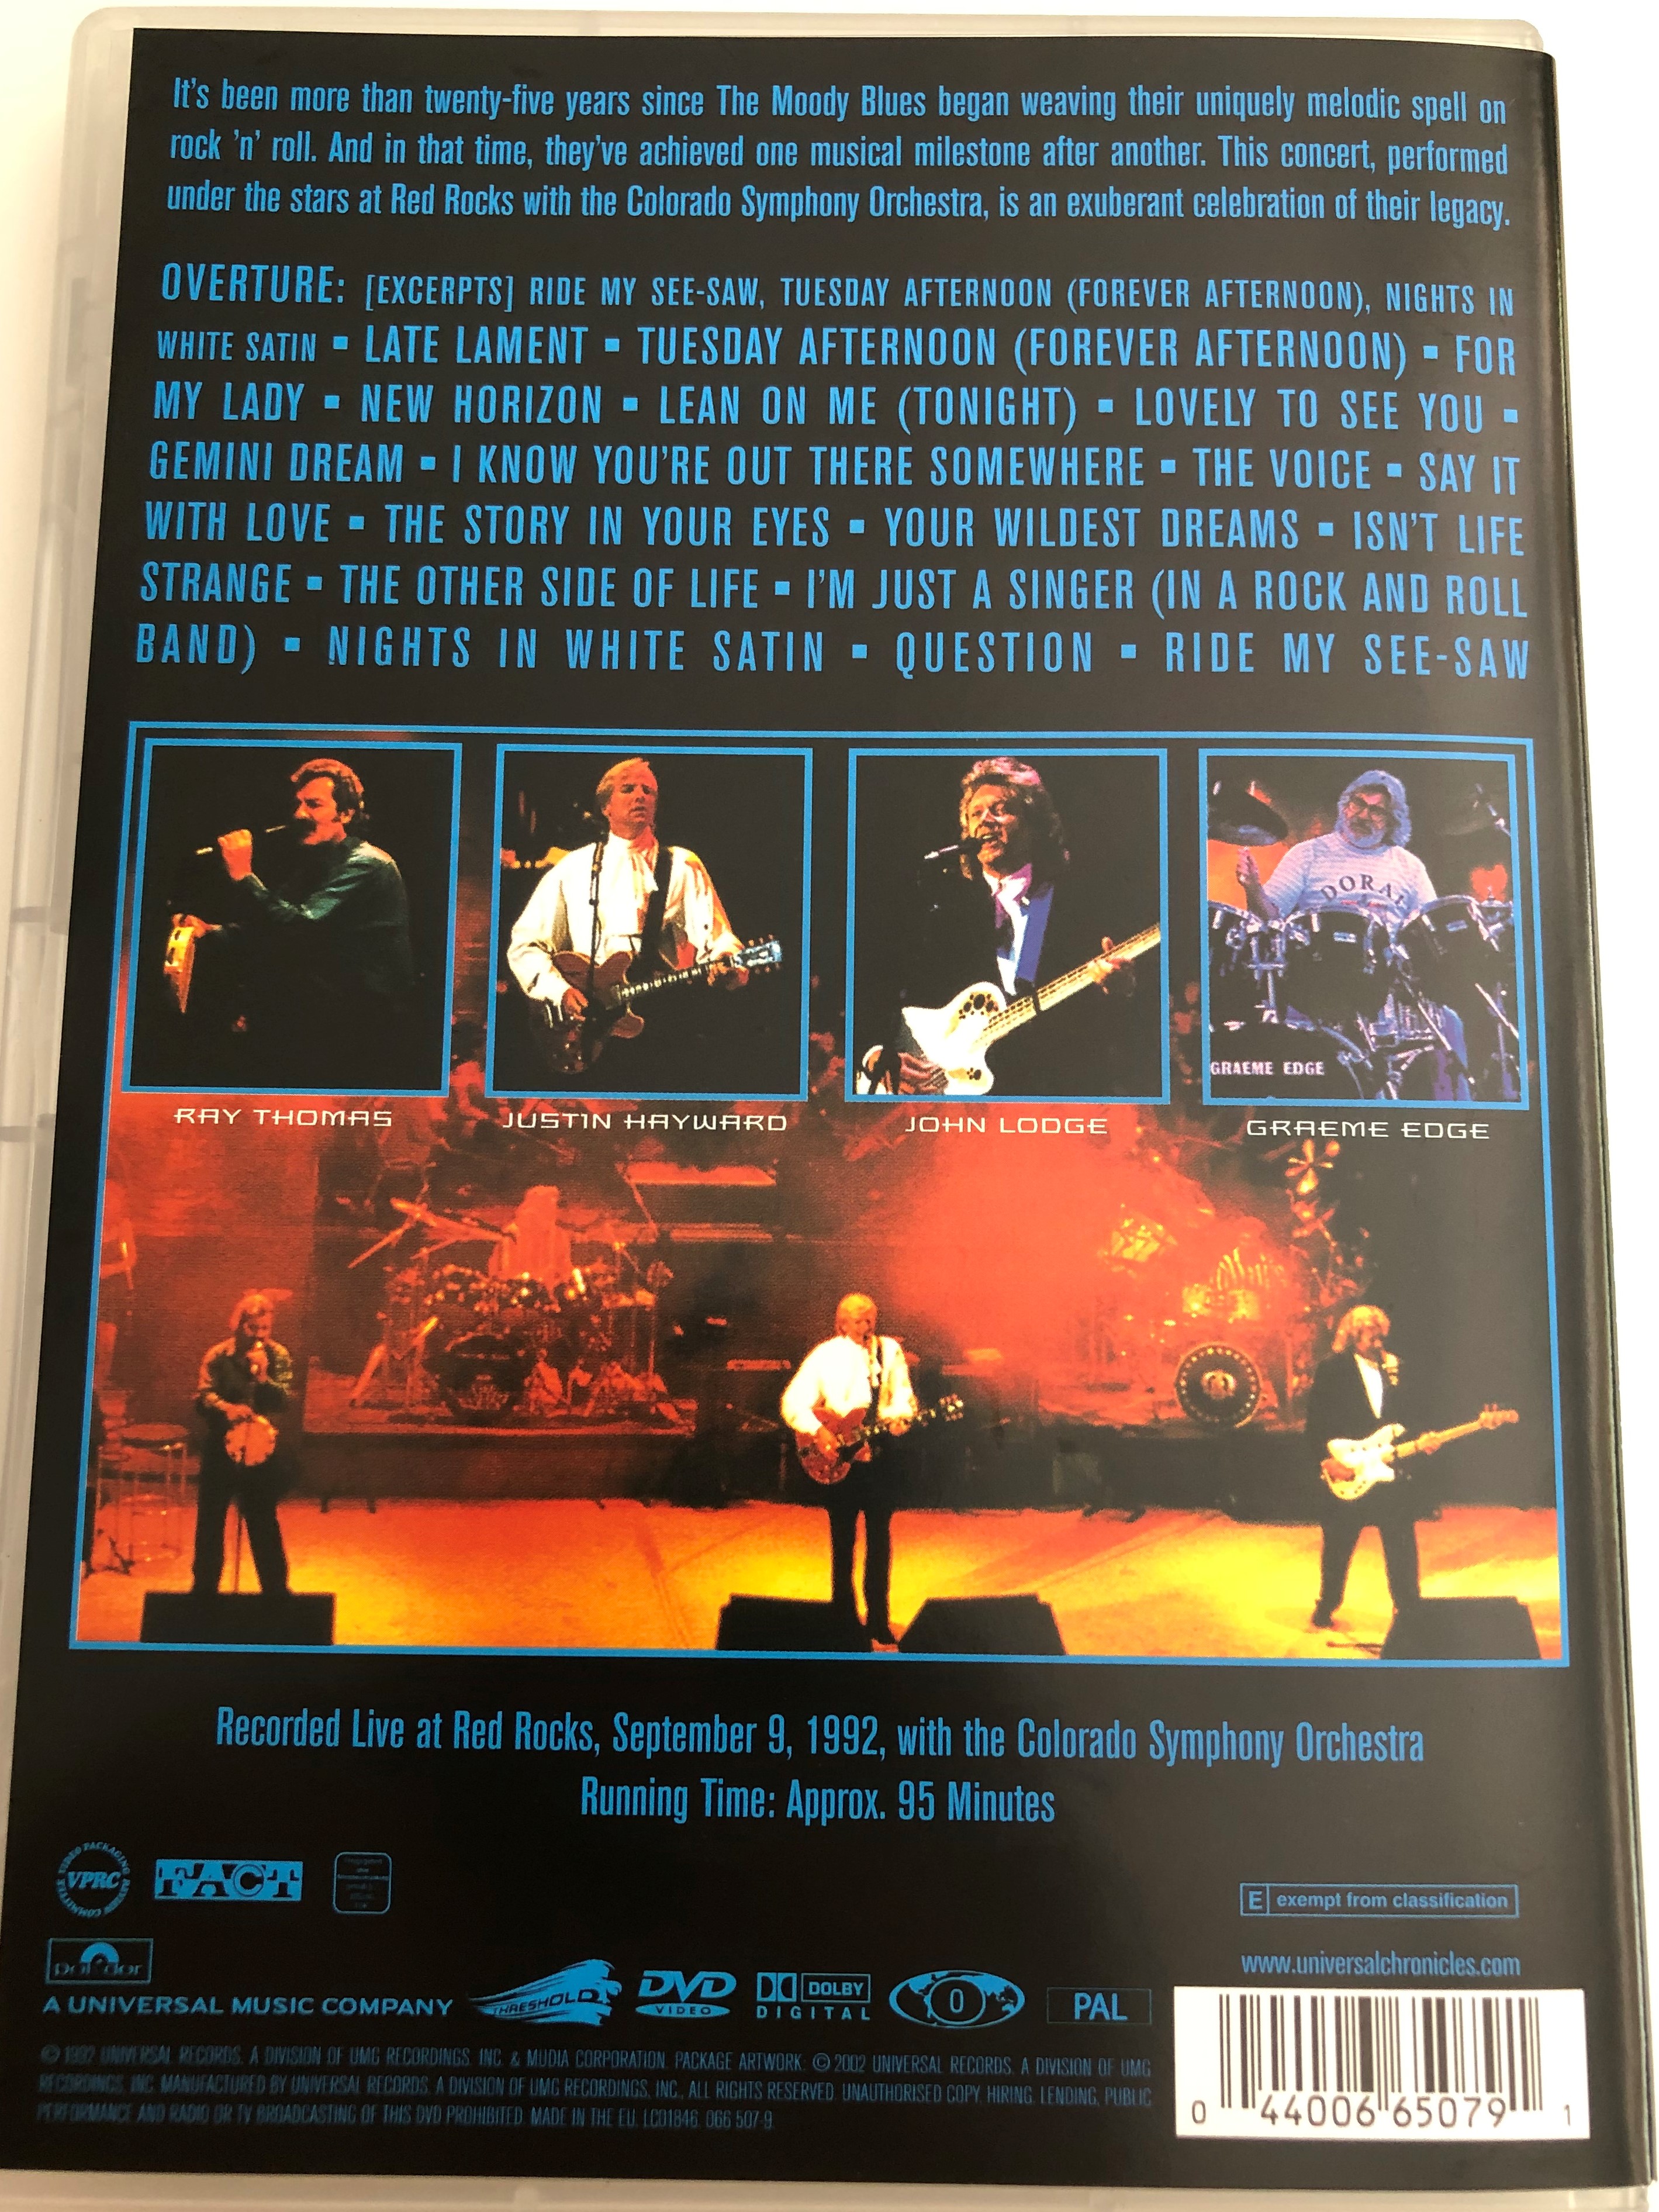 the-moody-blues-dvd-1992-a-night-at-red-rocks-with-the-colorado-symphony-orchestra-recorded-live-at-red-rocks-1992-3-.jpg